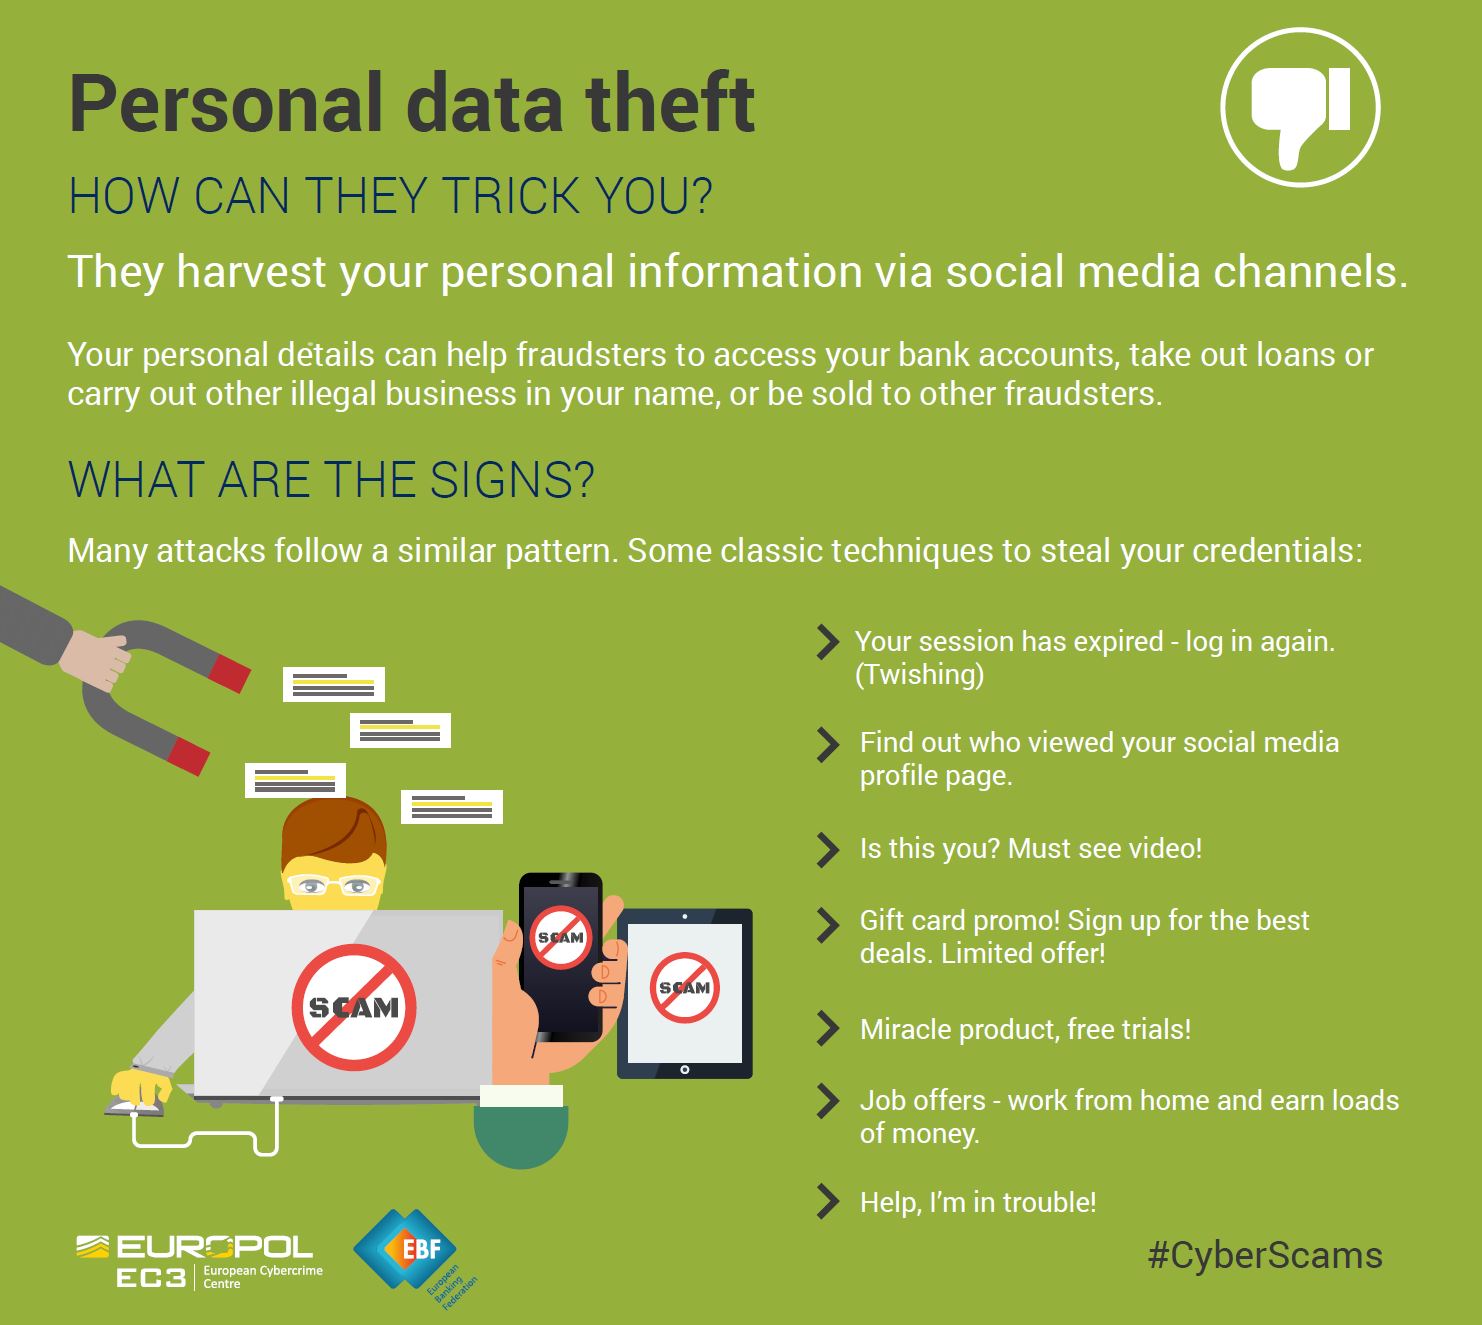 Have your personal details been stolen online? Share your stories